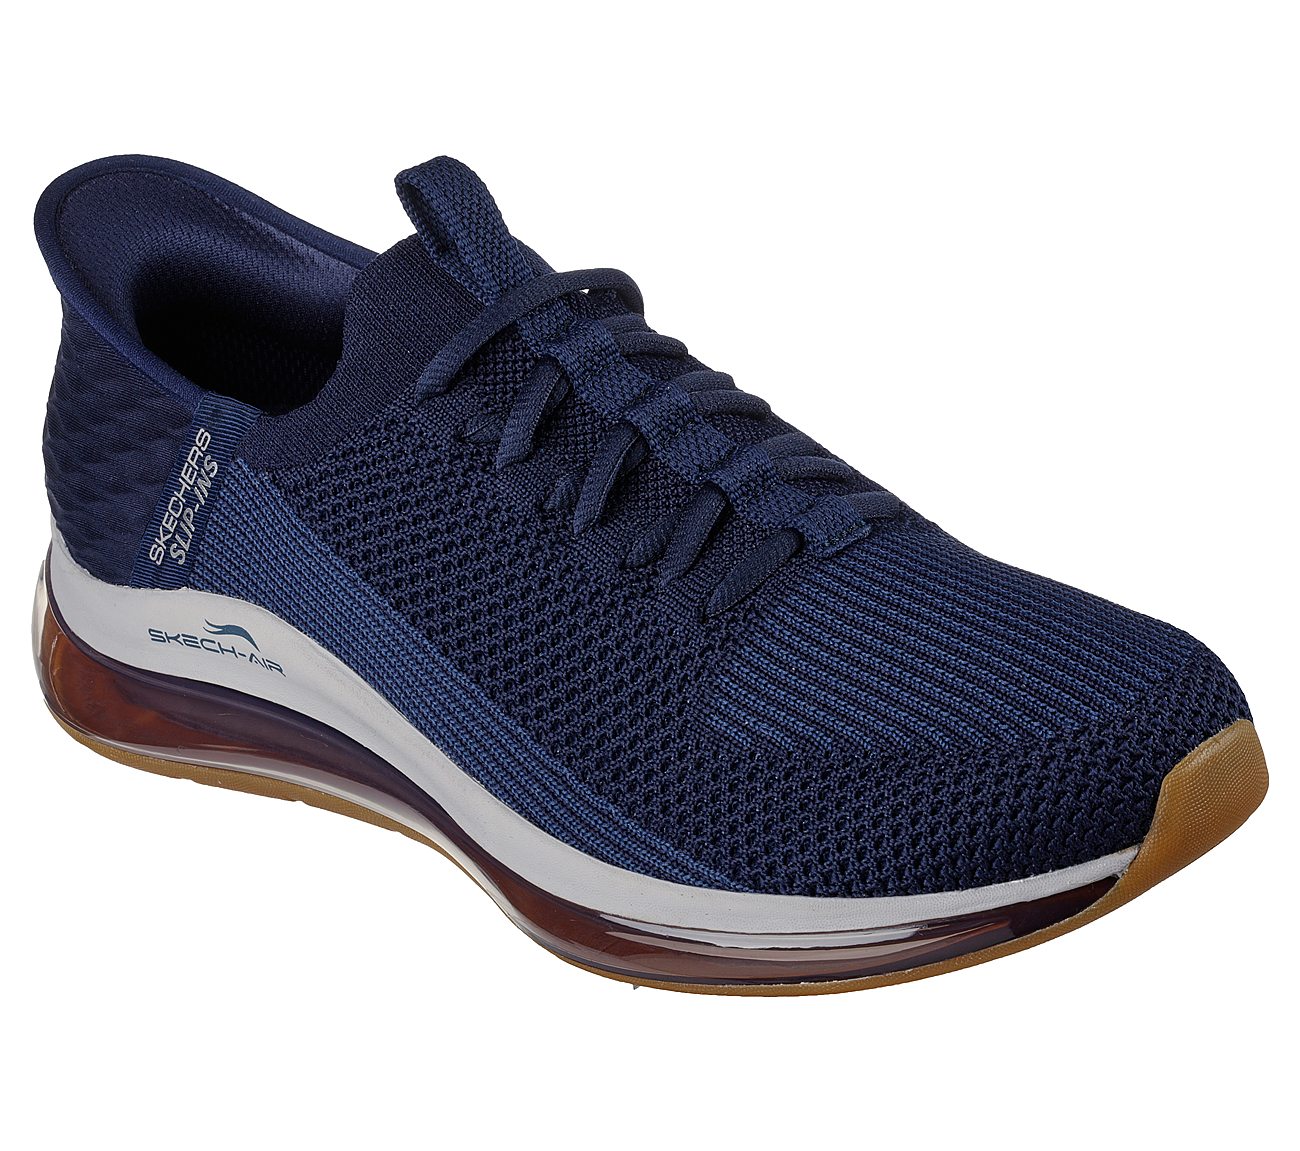 SKECH-AIR ELEMENT 2.0 - NEW W, NNNAVY Footwear Right View